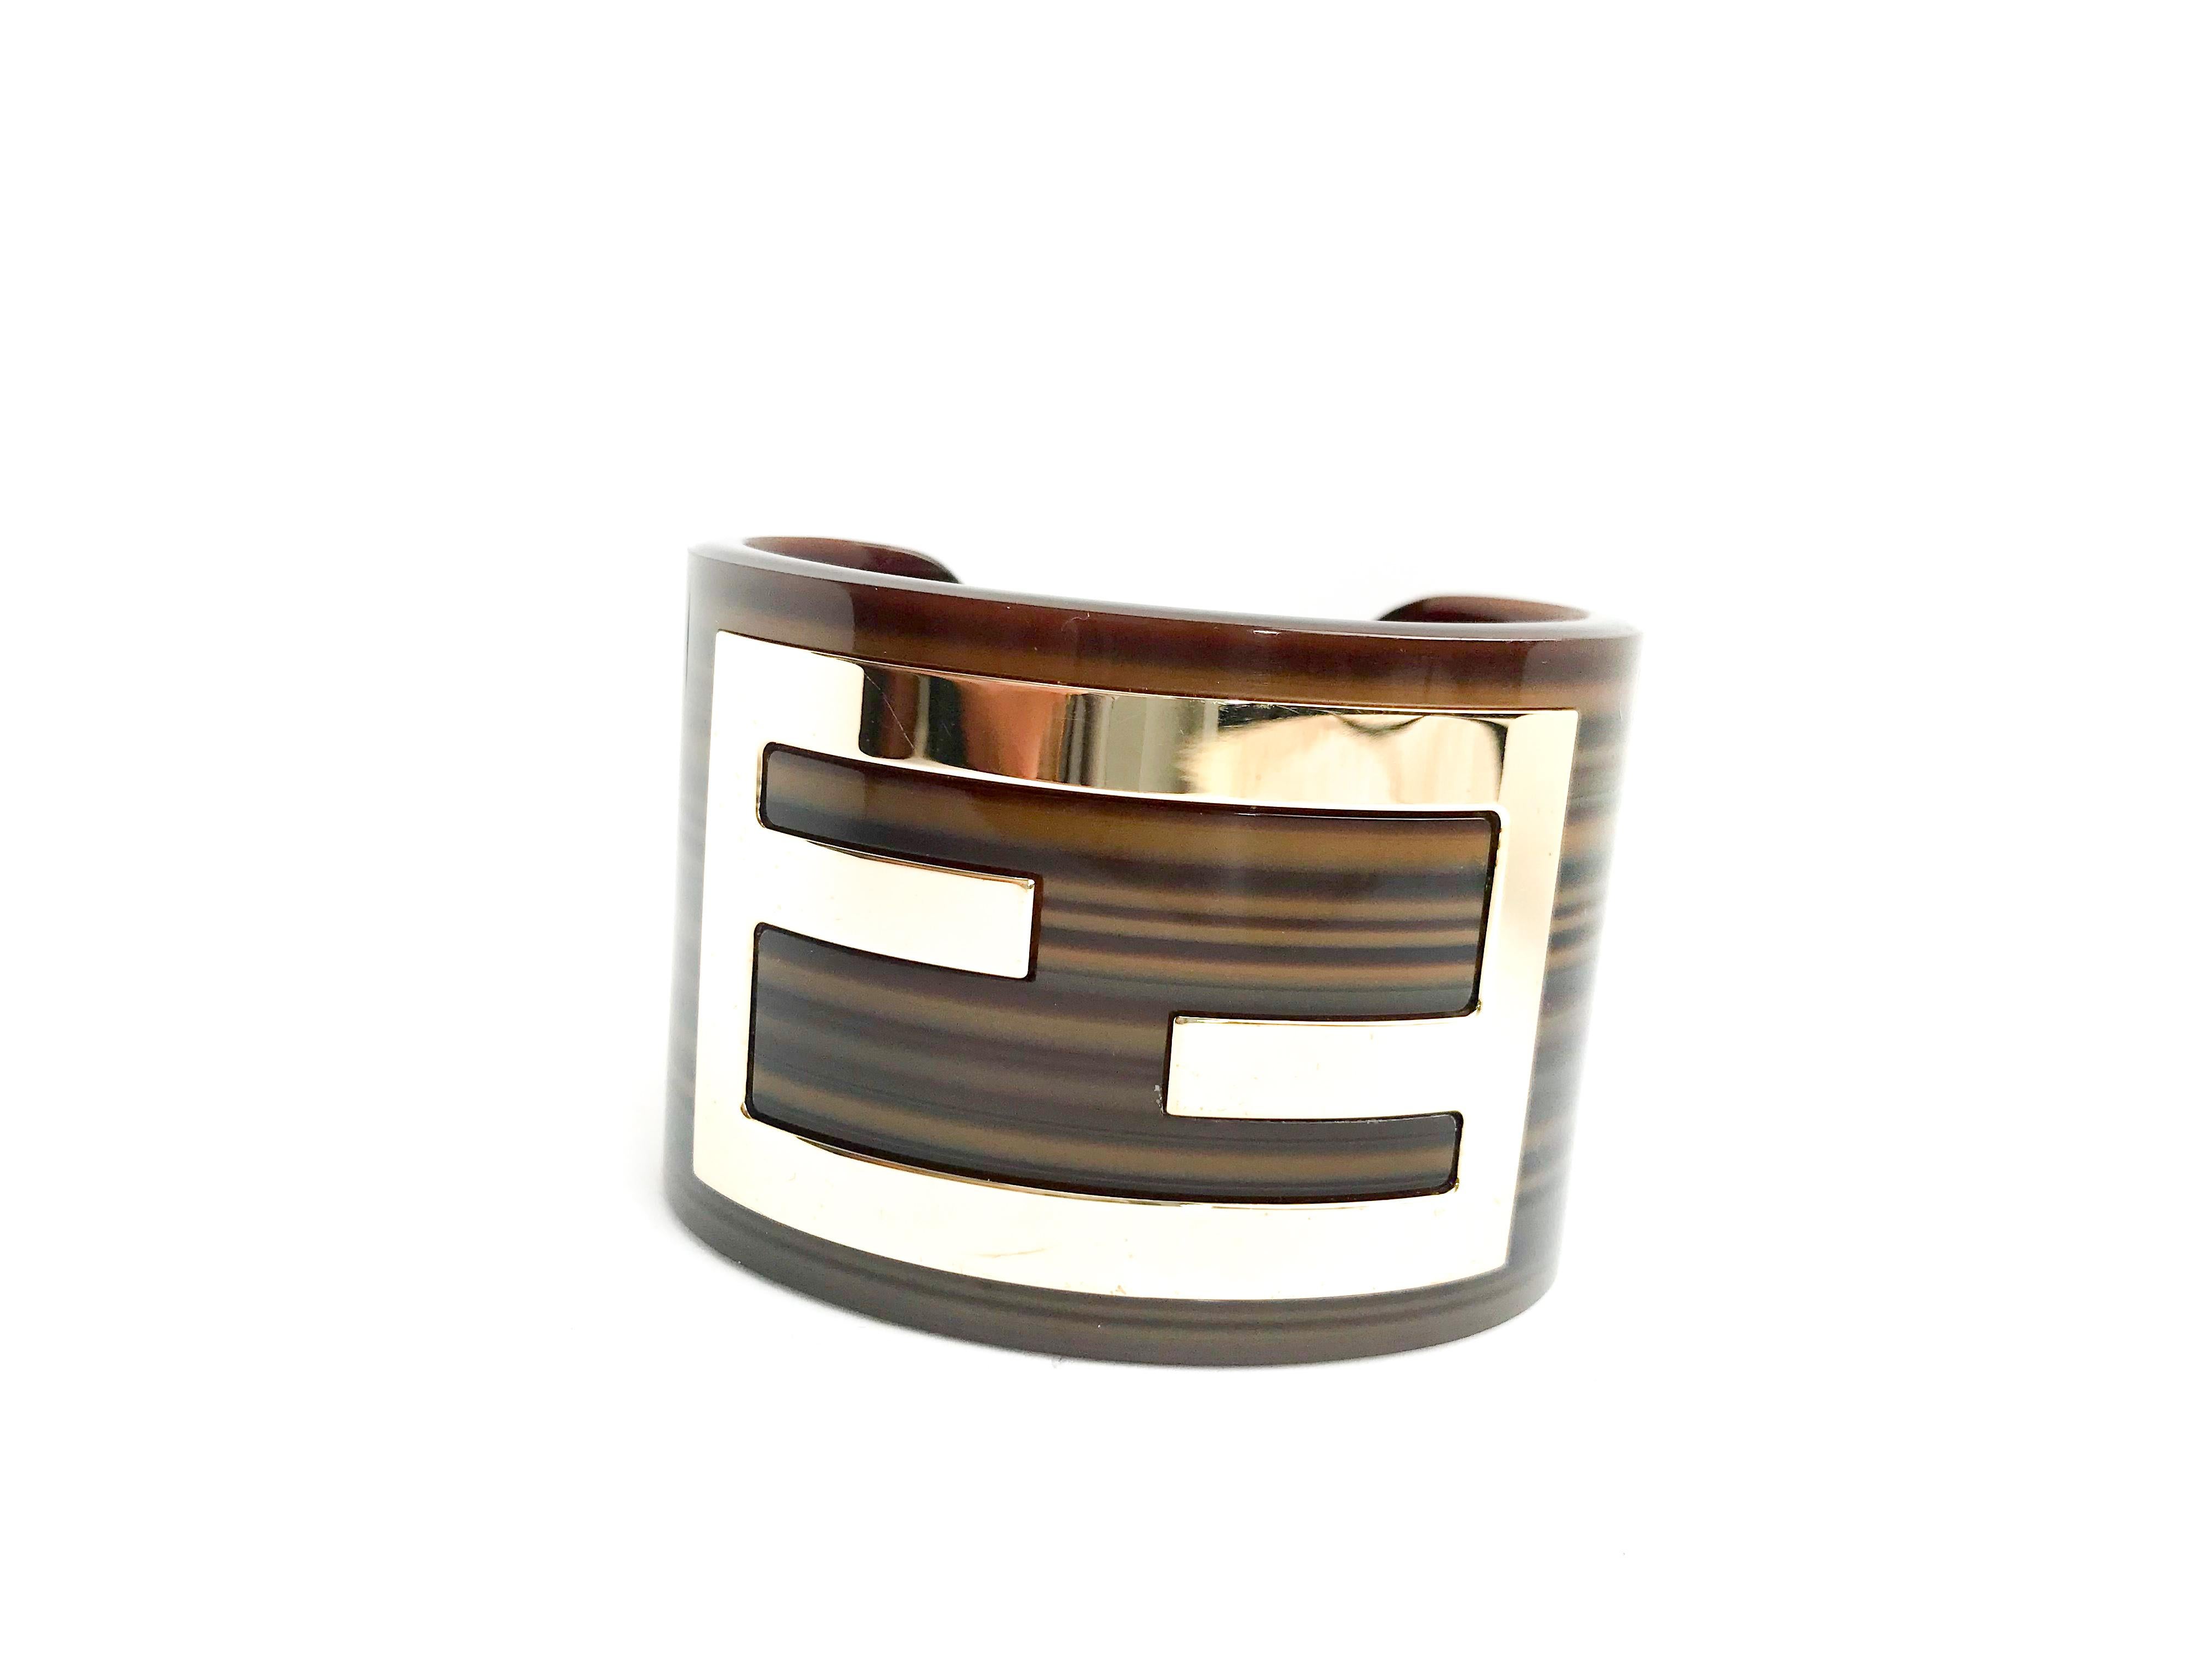 Fendi Cuff Bracelet. Made of an beautiful deep oak brown acrylic with metal Fendi logo inlaid.  Signed Fendi Made in Italy inside the bracelet.

Comes with dustbag.